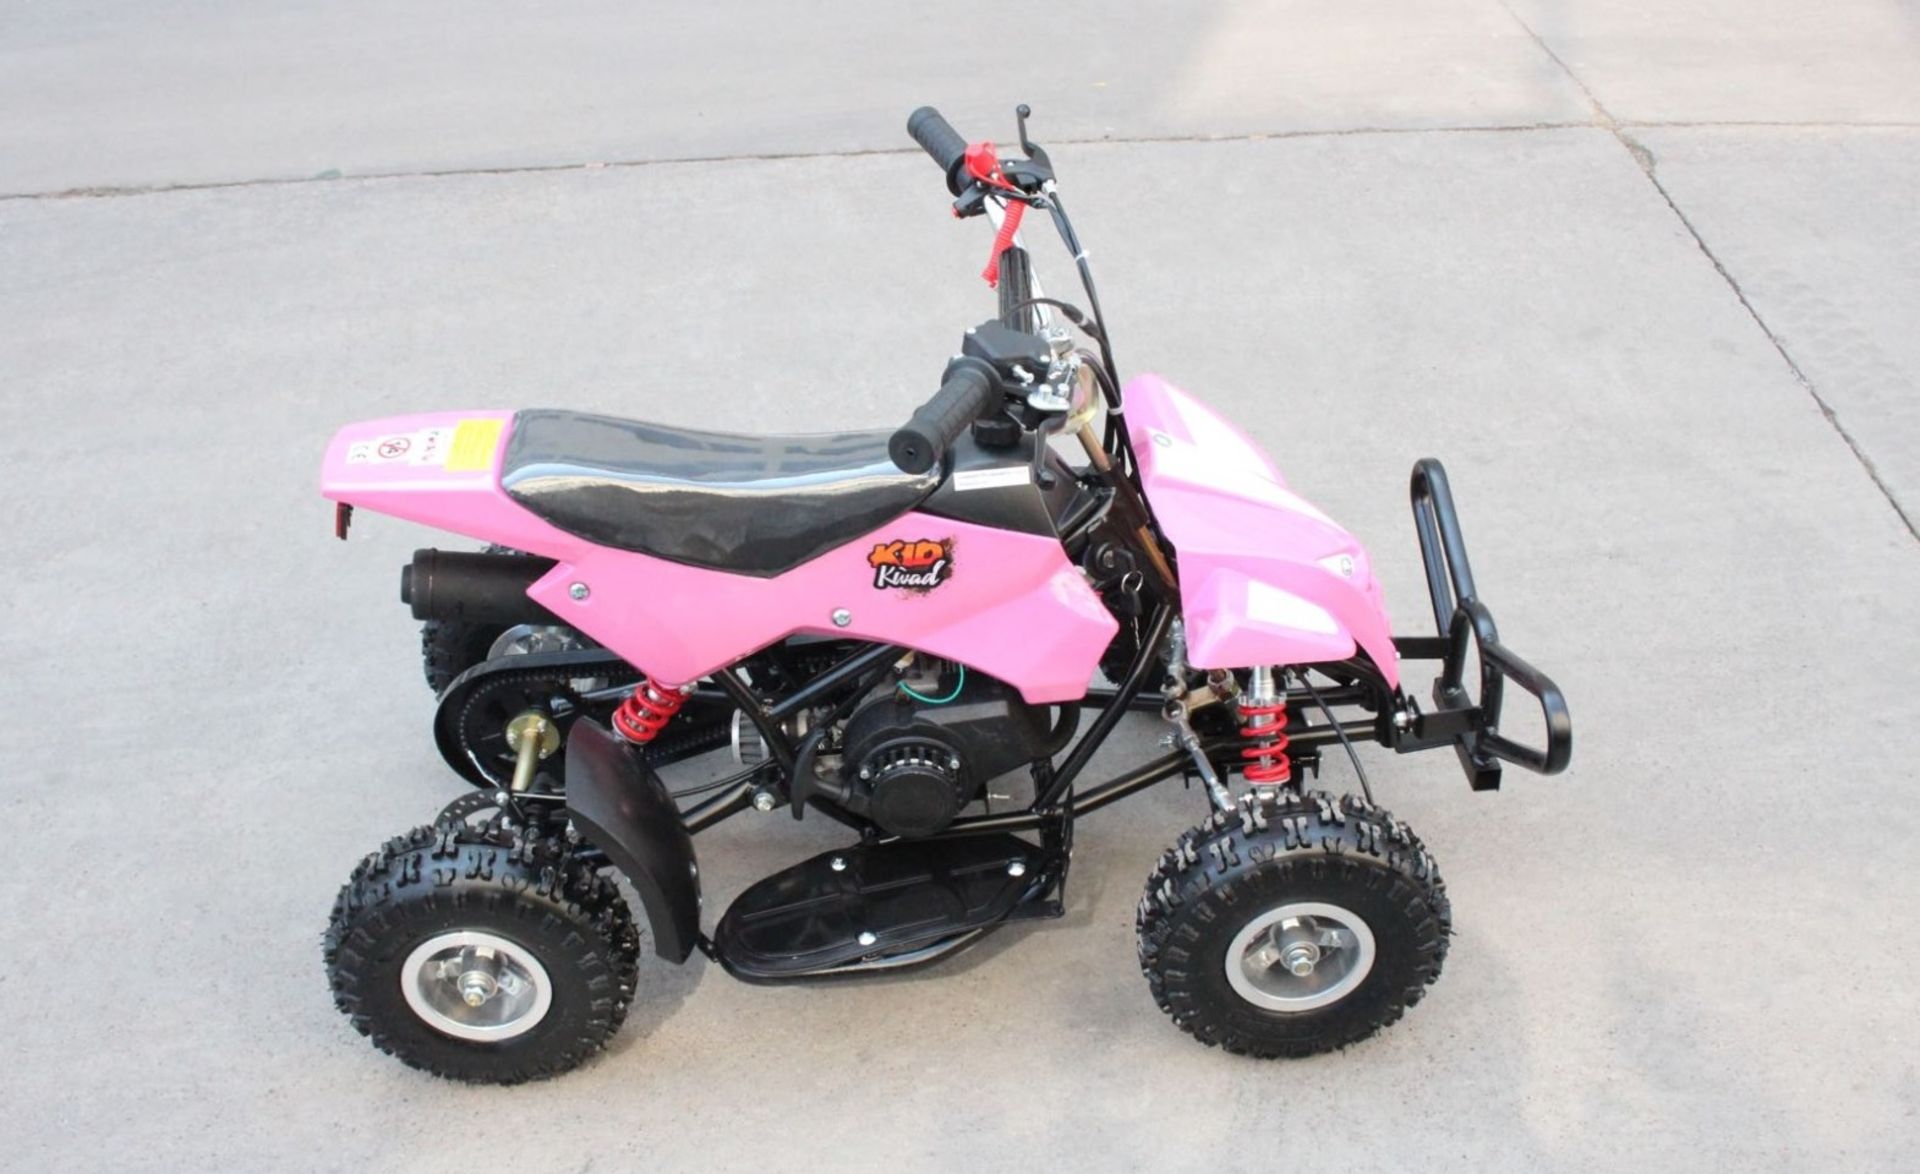 + VAT Brand New 50cc Mini Quad Bike FRM - Colours May Vary - Picture May Vary From Actual Item - Bild 3 aus 9